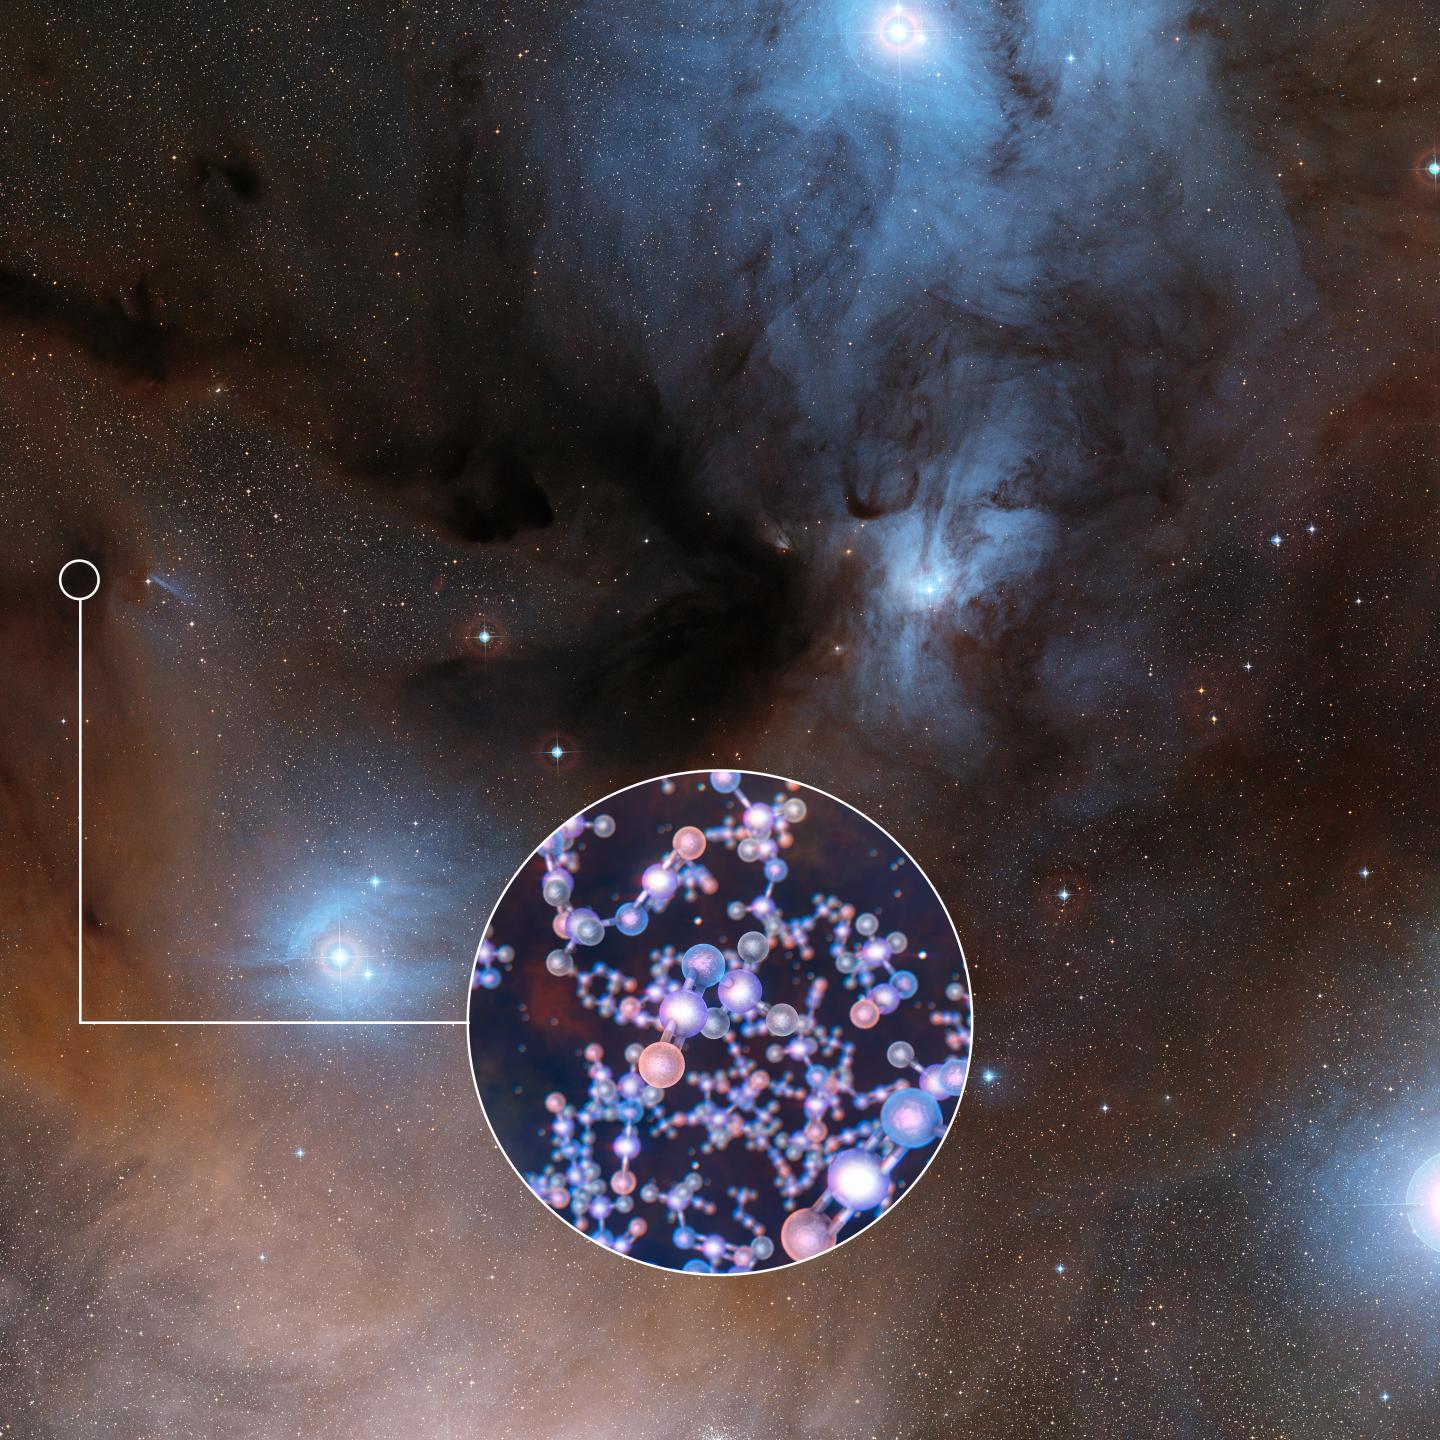 Organic Compound Found in Early Stages of Star Formation